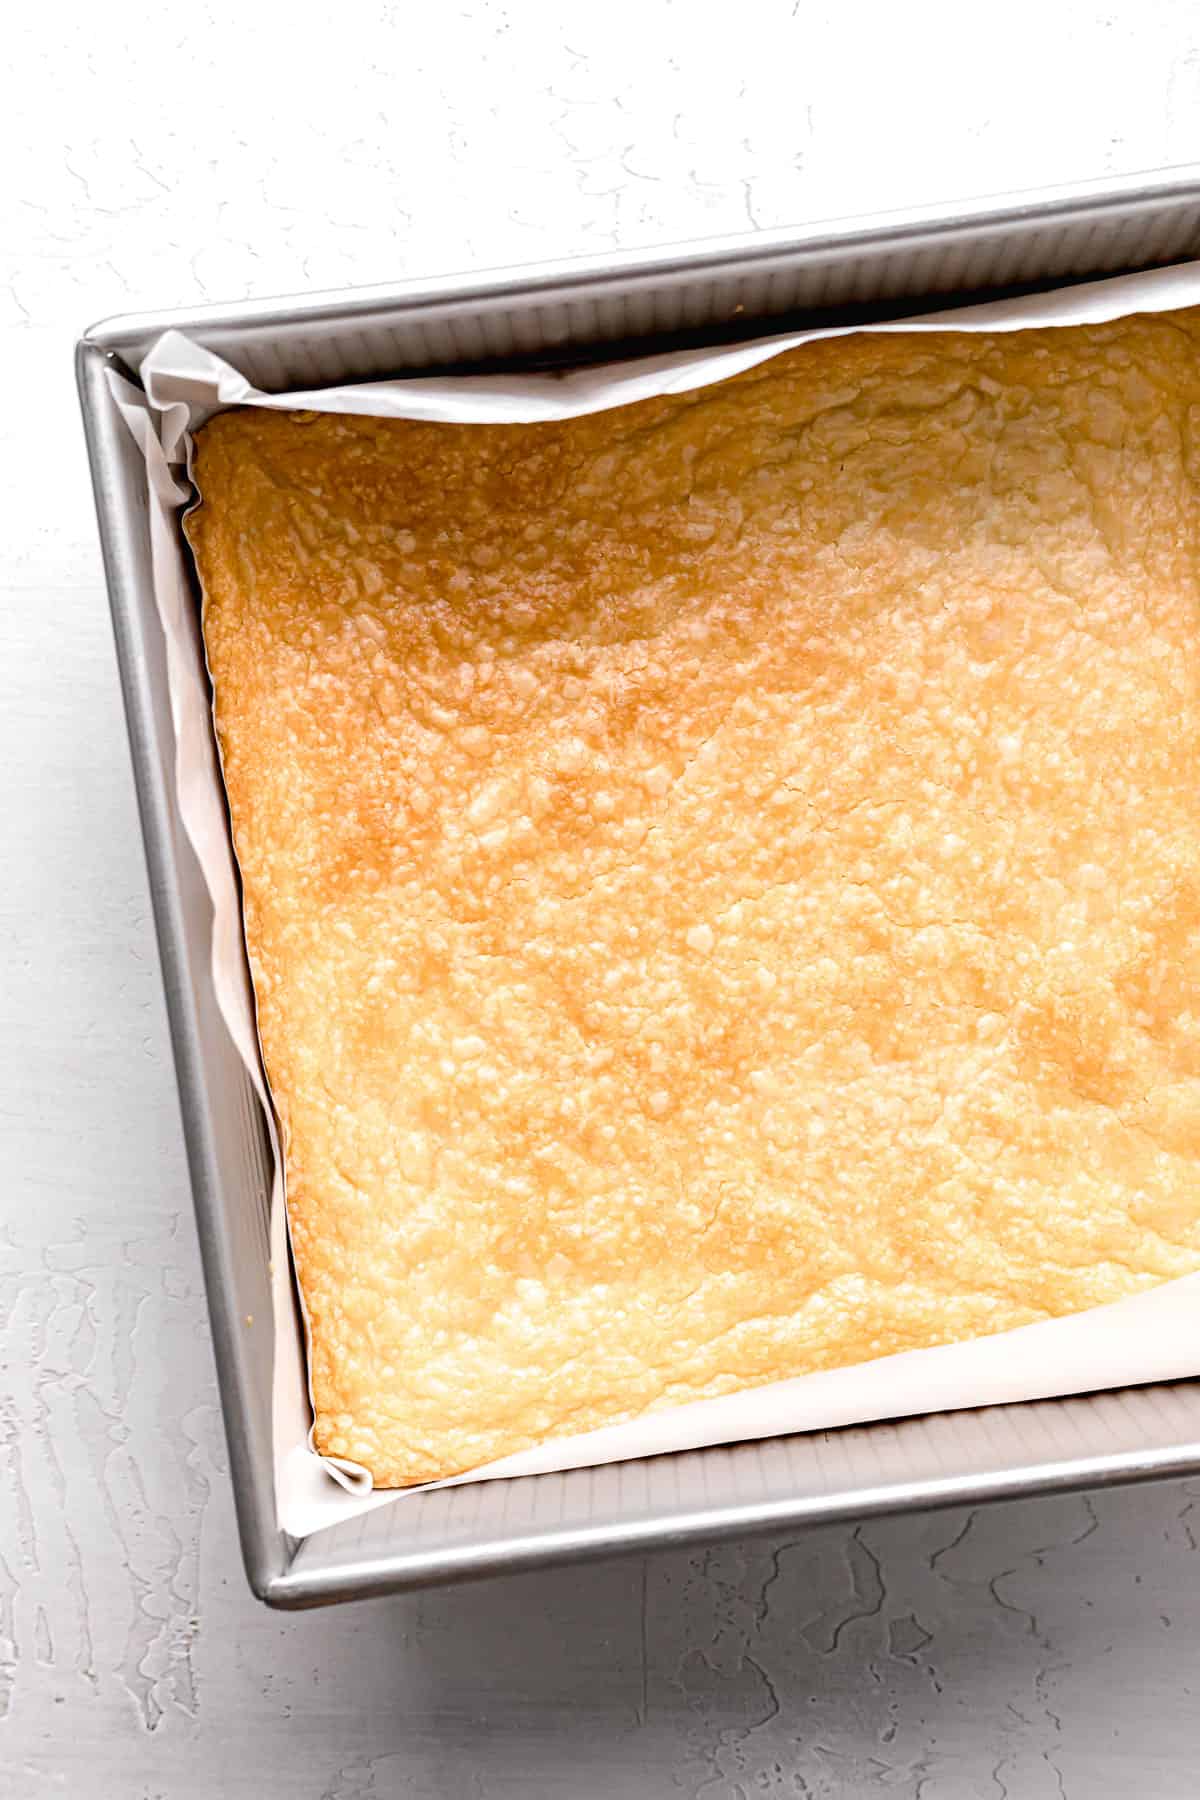 baked shortbread crust in square pan.